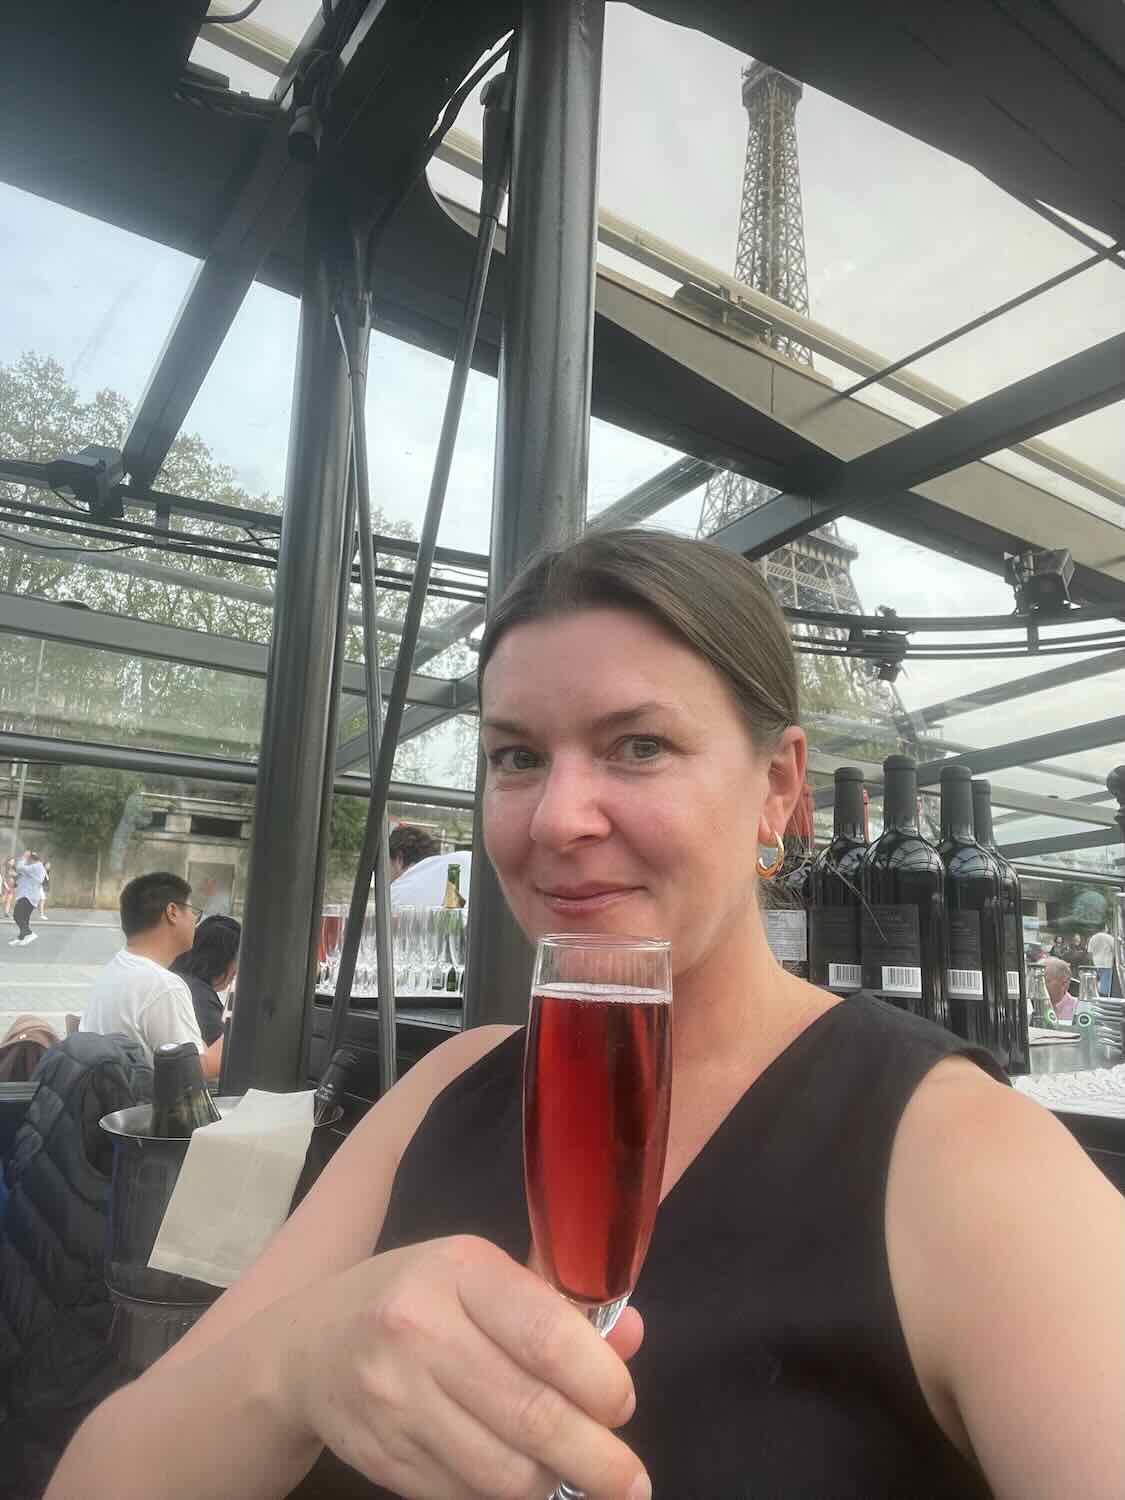 A woman enjoying a glass of rosé wine at a restaurant in Paris, with the Eiffel Tower visible in the background.